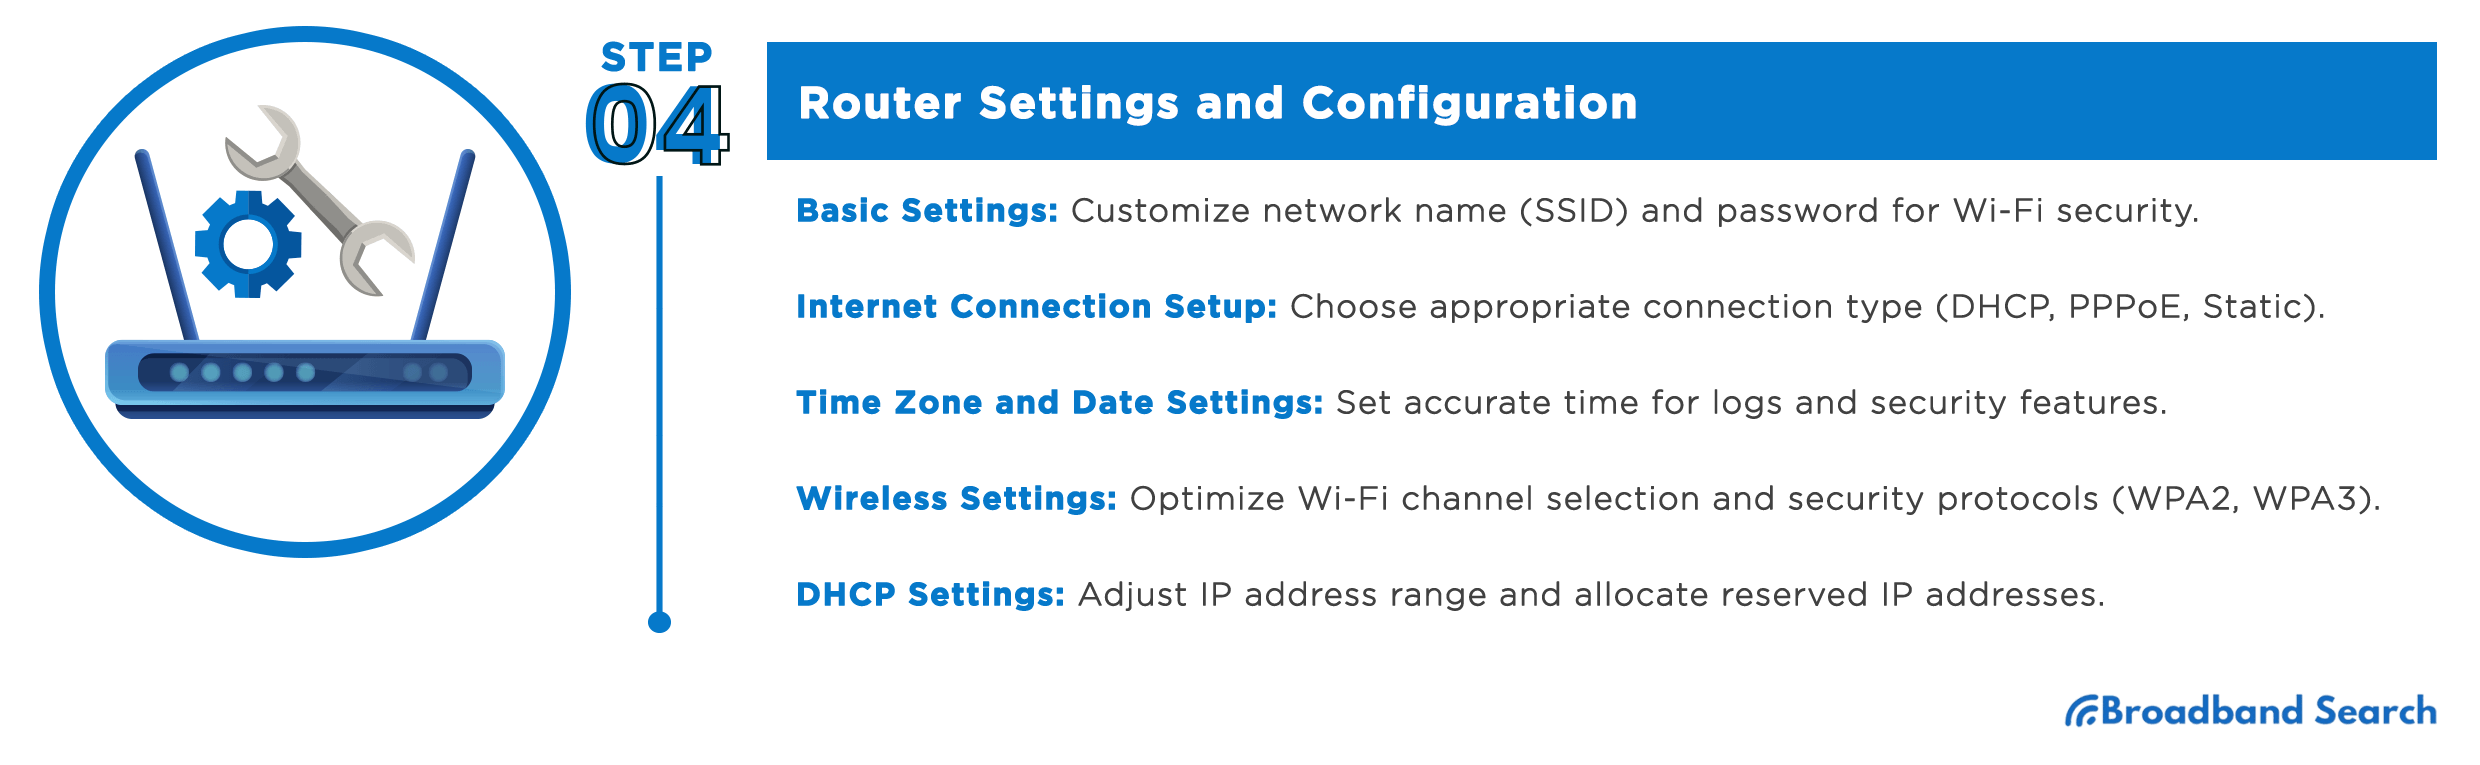 Insturctions on router settings and configuration